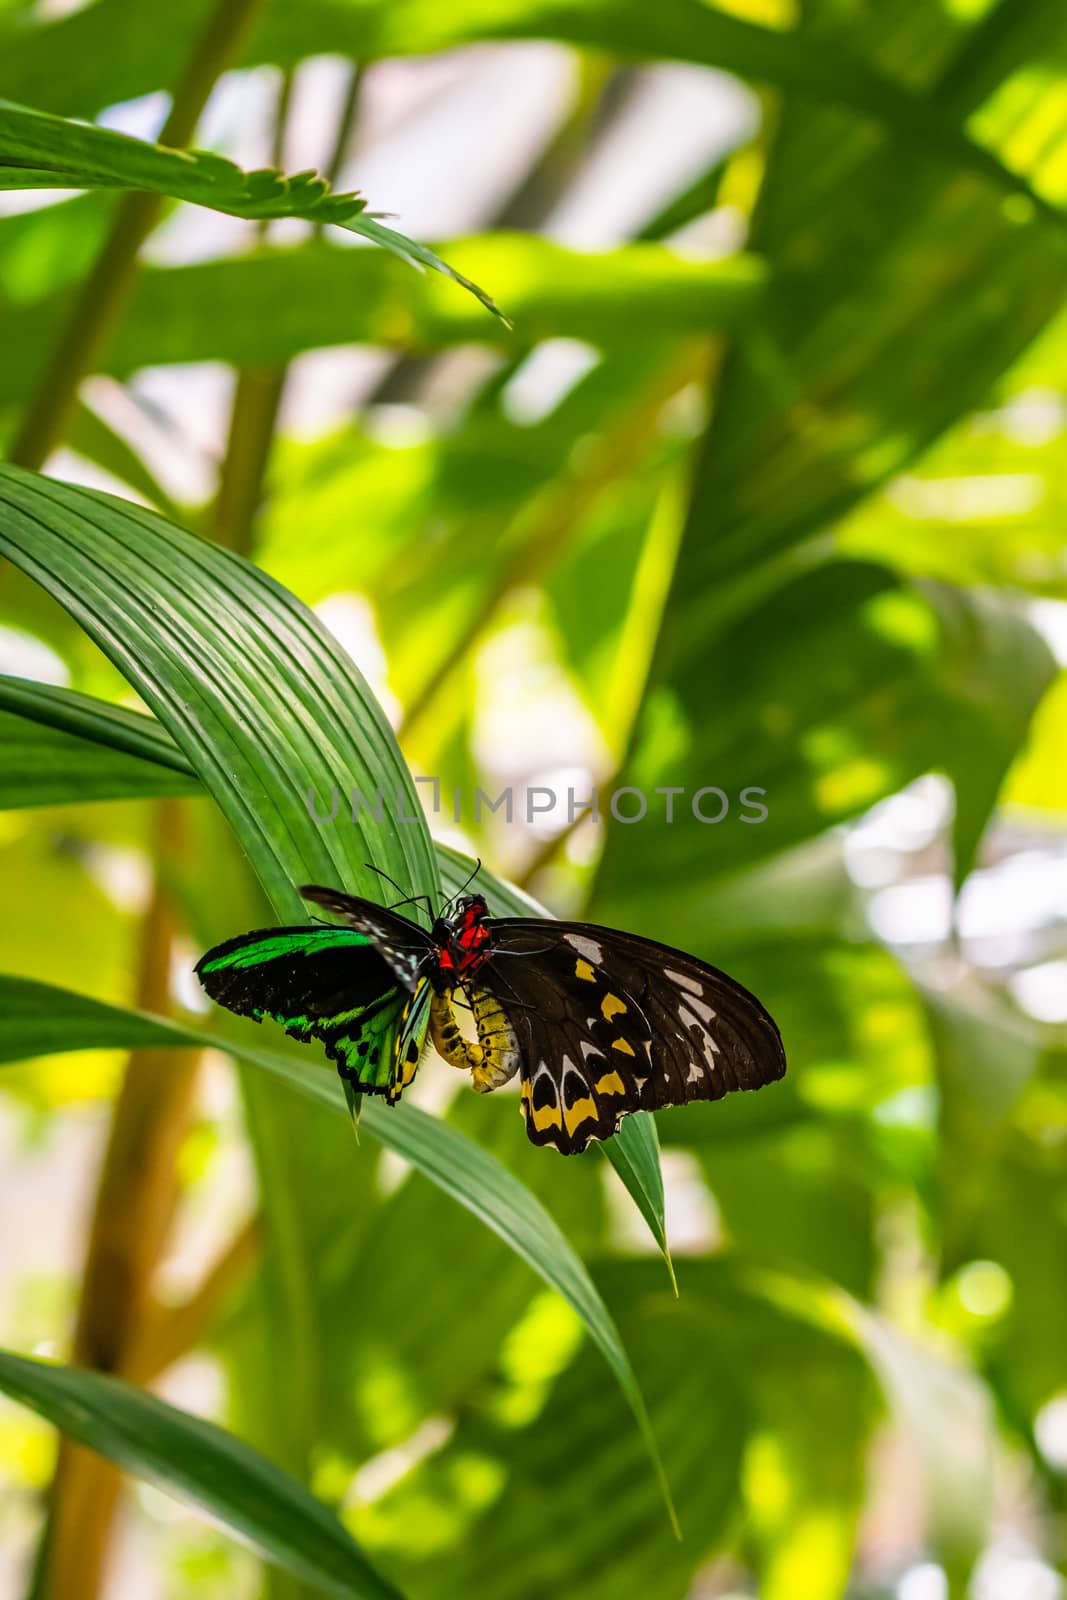 Mating pair of Ornithoptera euphorion - birdwing butterfly by mauricallari